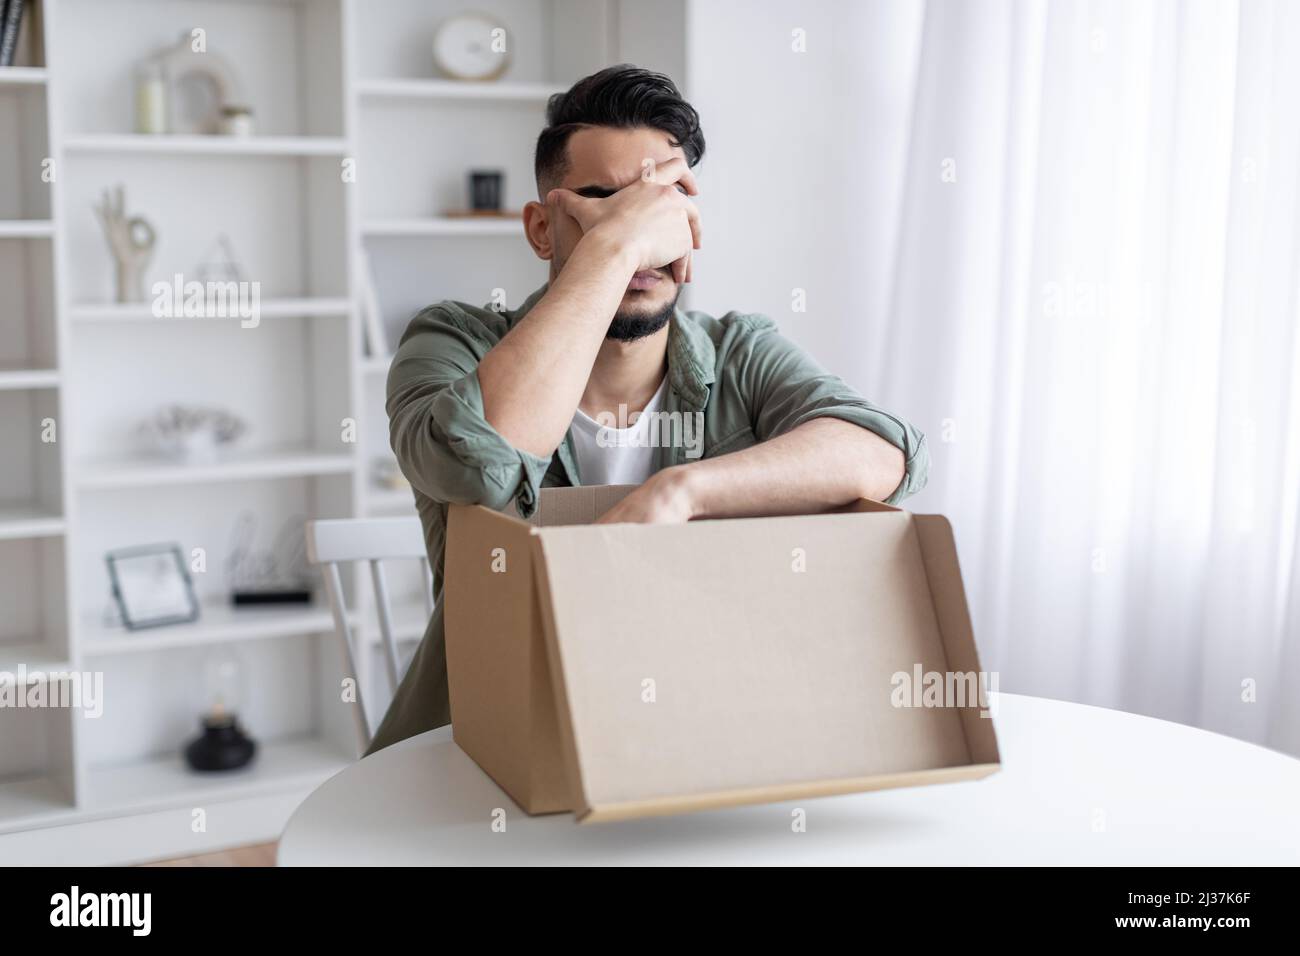 Wrong Item. Upset Arab Guy Opening Parcel And Making Facepalm Gesture Stock Photo